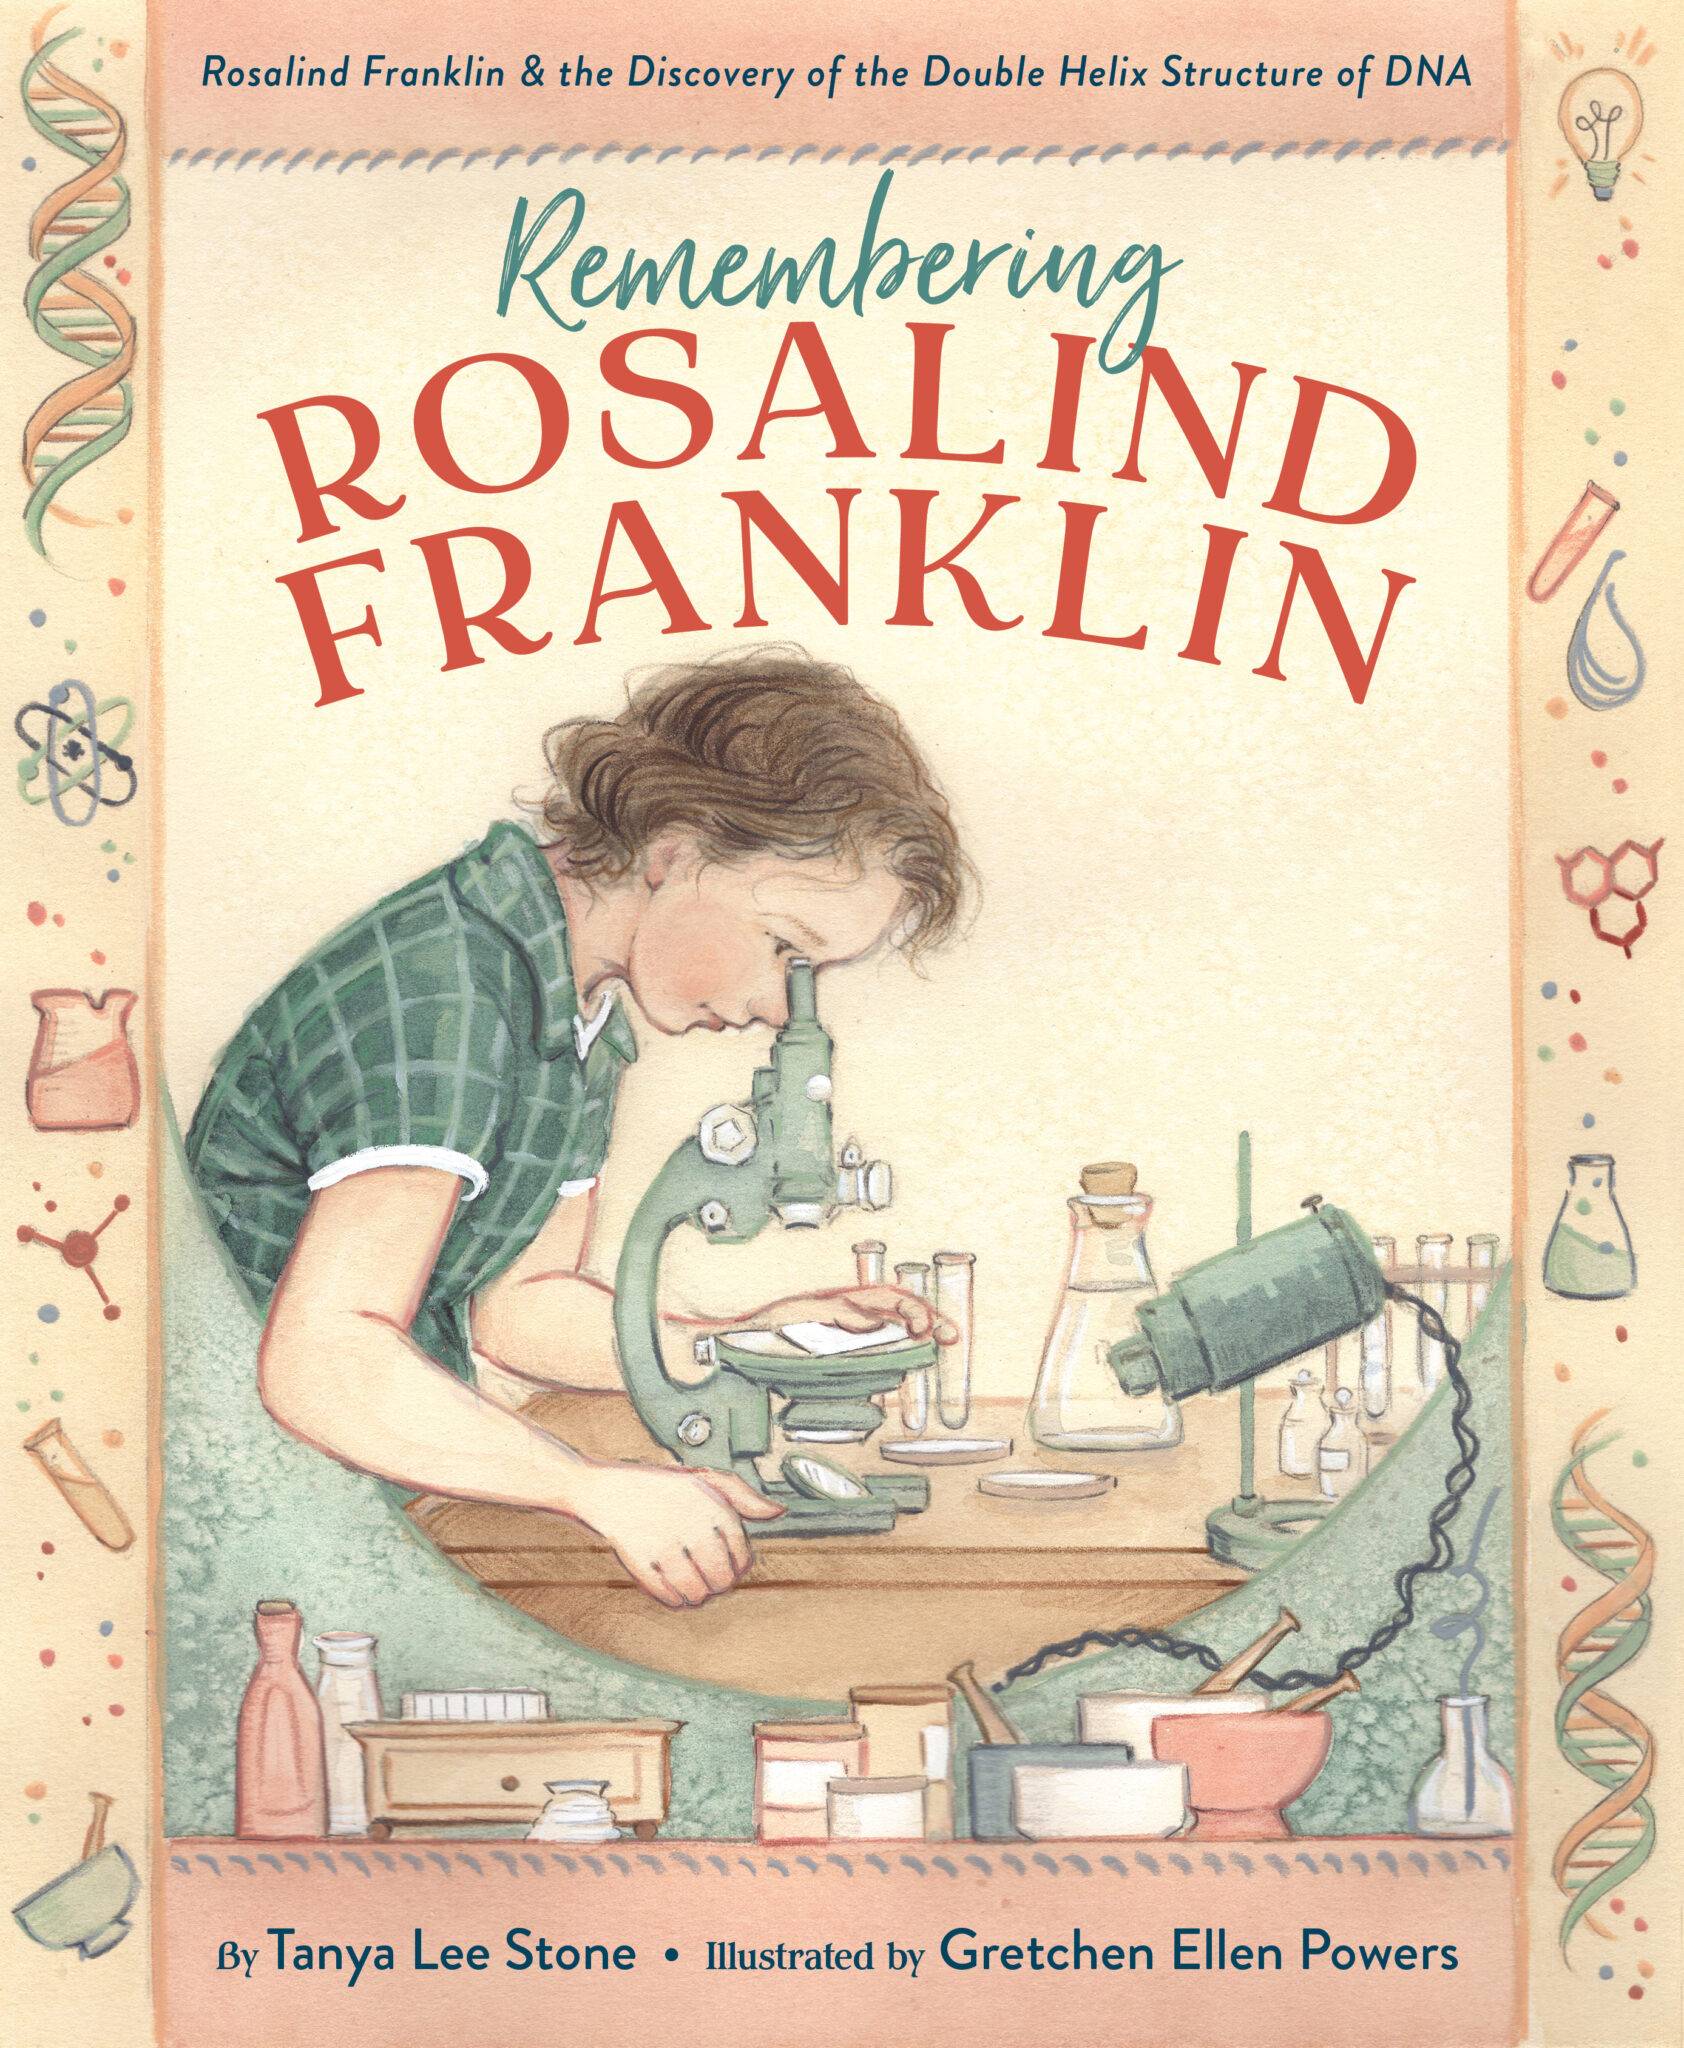 Rosalind Franklin & the Discovery of the Double Helix Structure of DNA